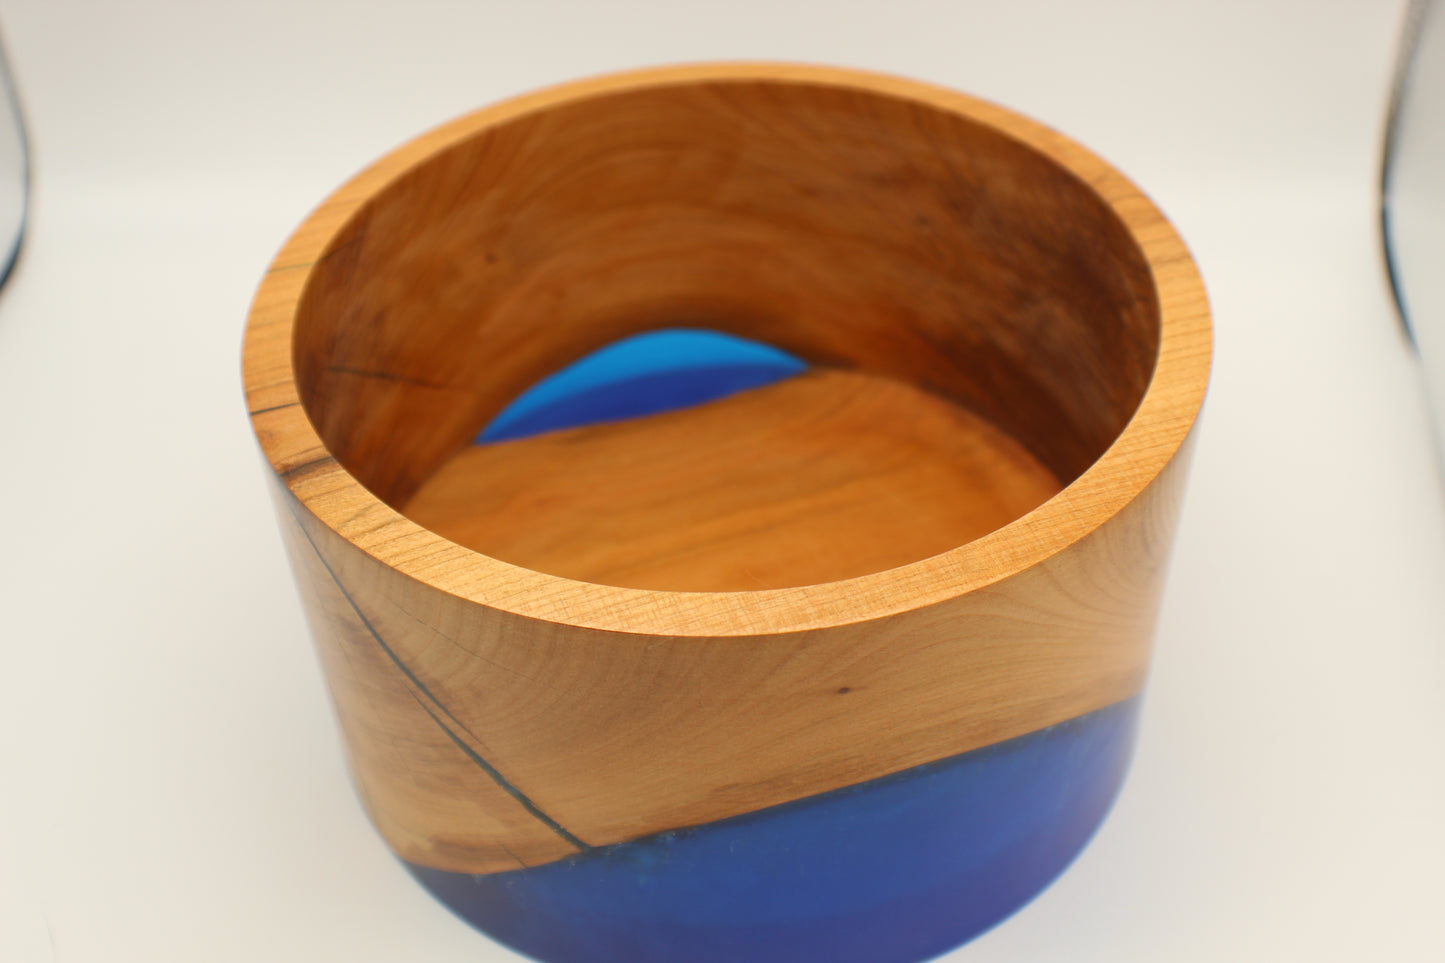 Cherry Bowl with Blue resin inlay